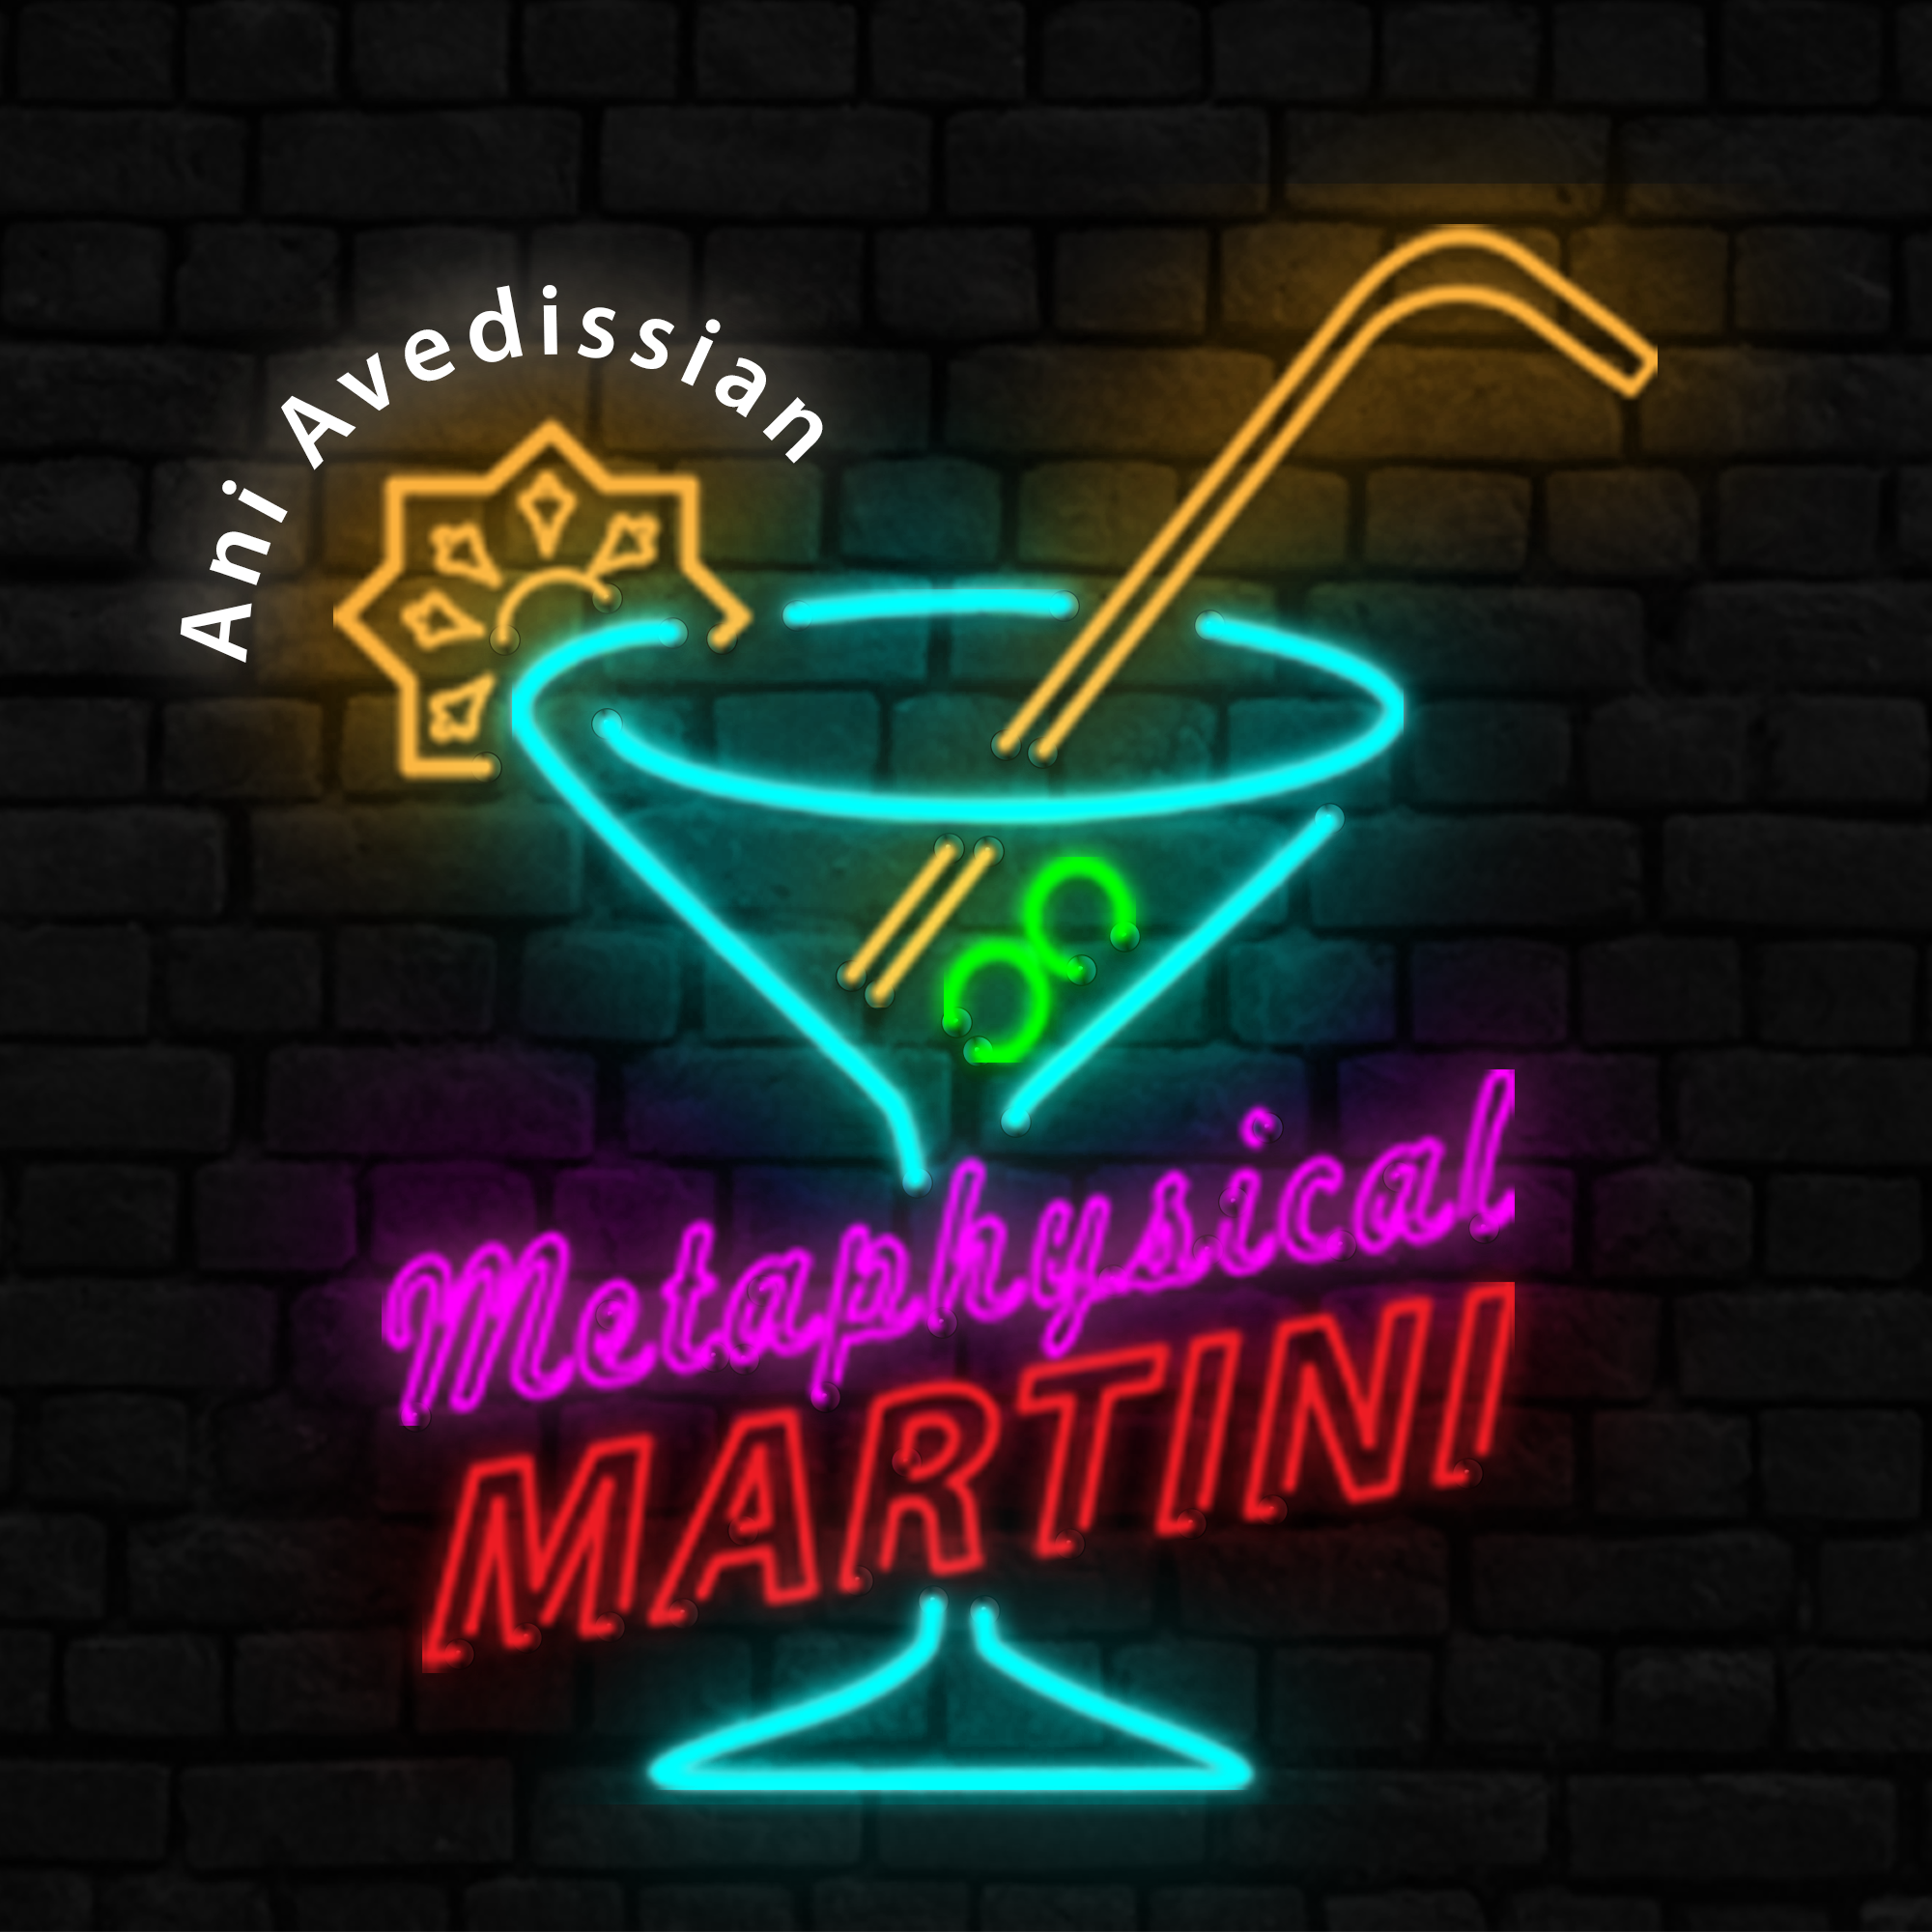 "Metaphysical Martini"  04/01/2020  Let's end the confusion!  Do you want the truth or the illusion?